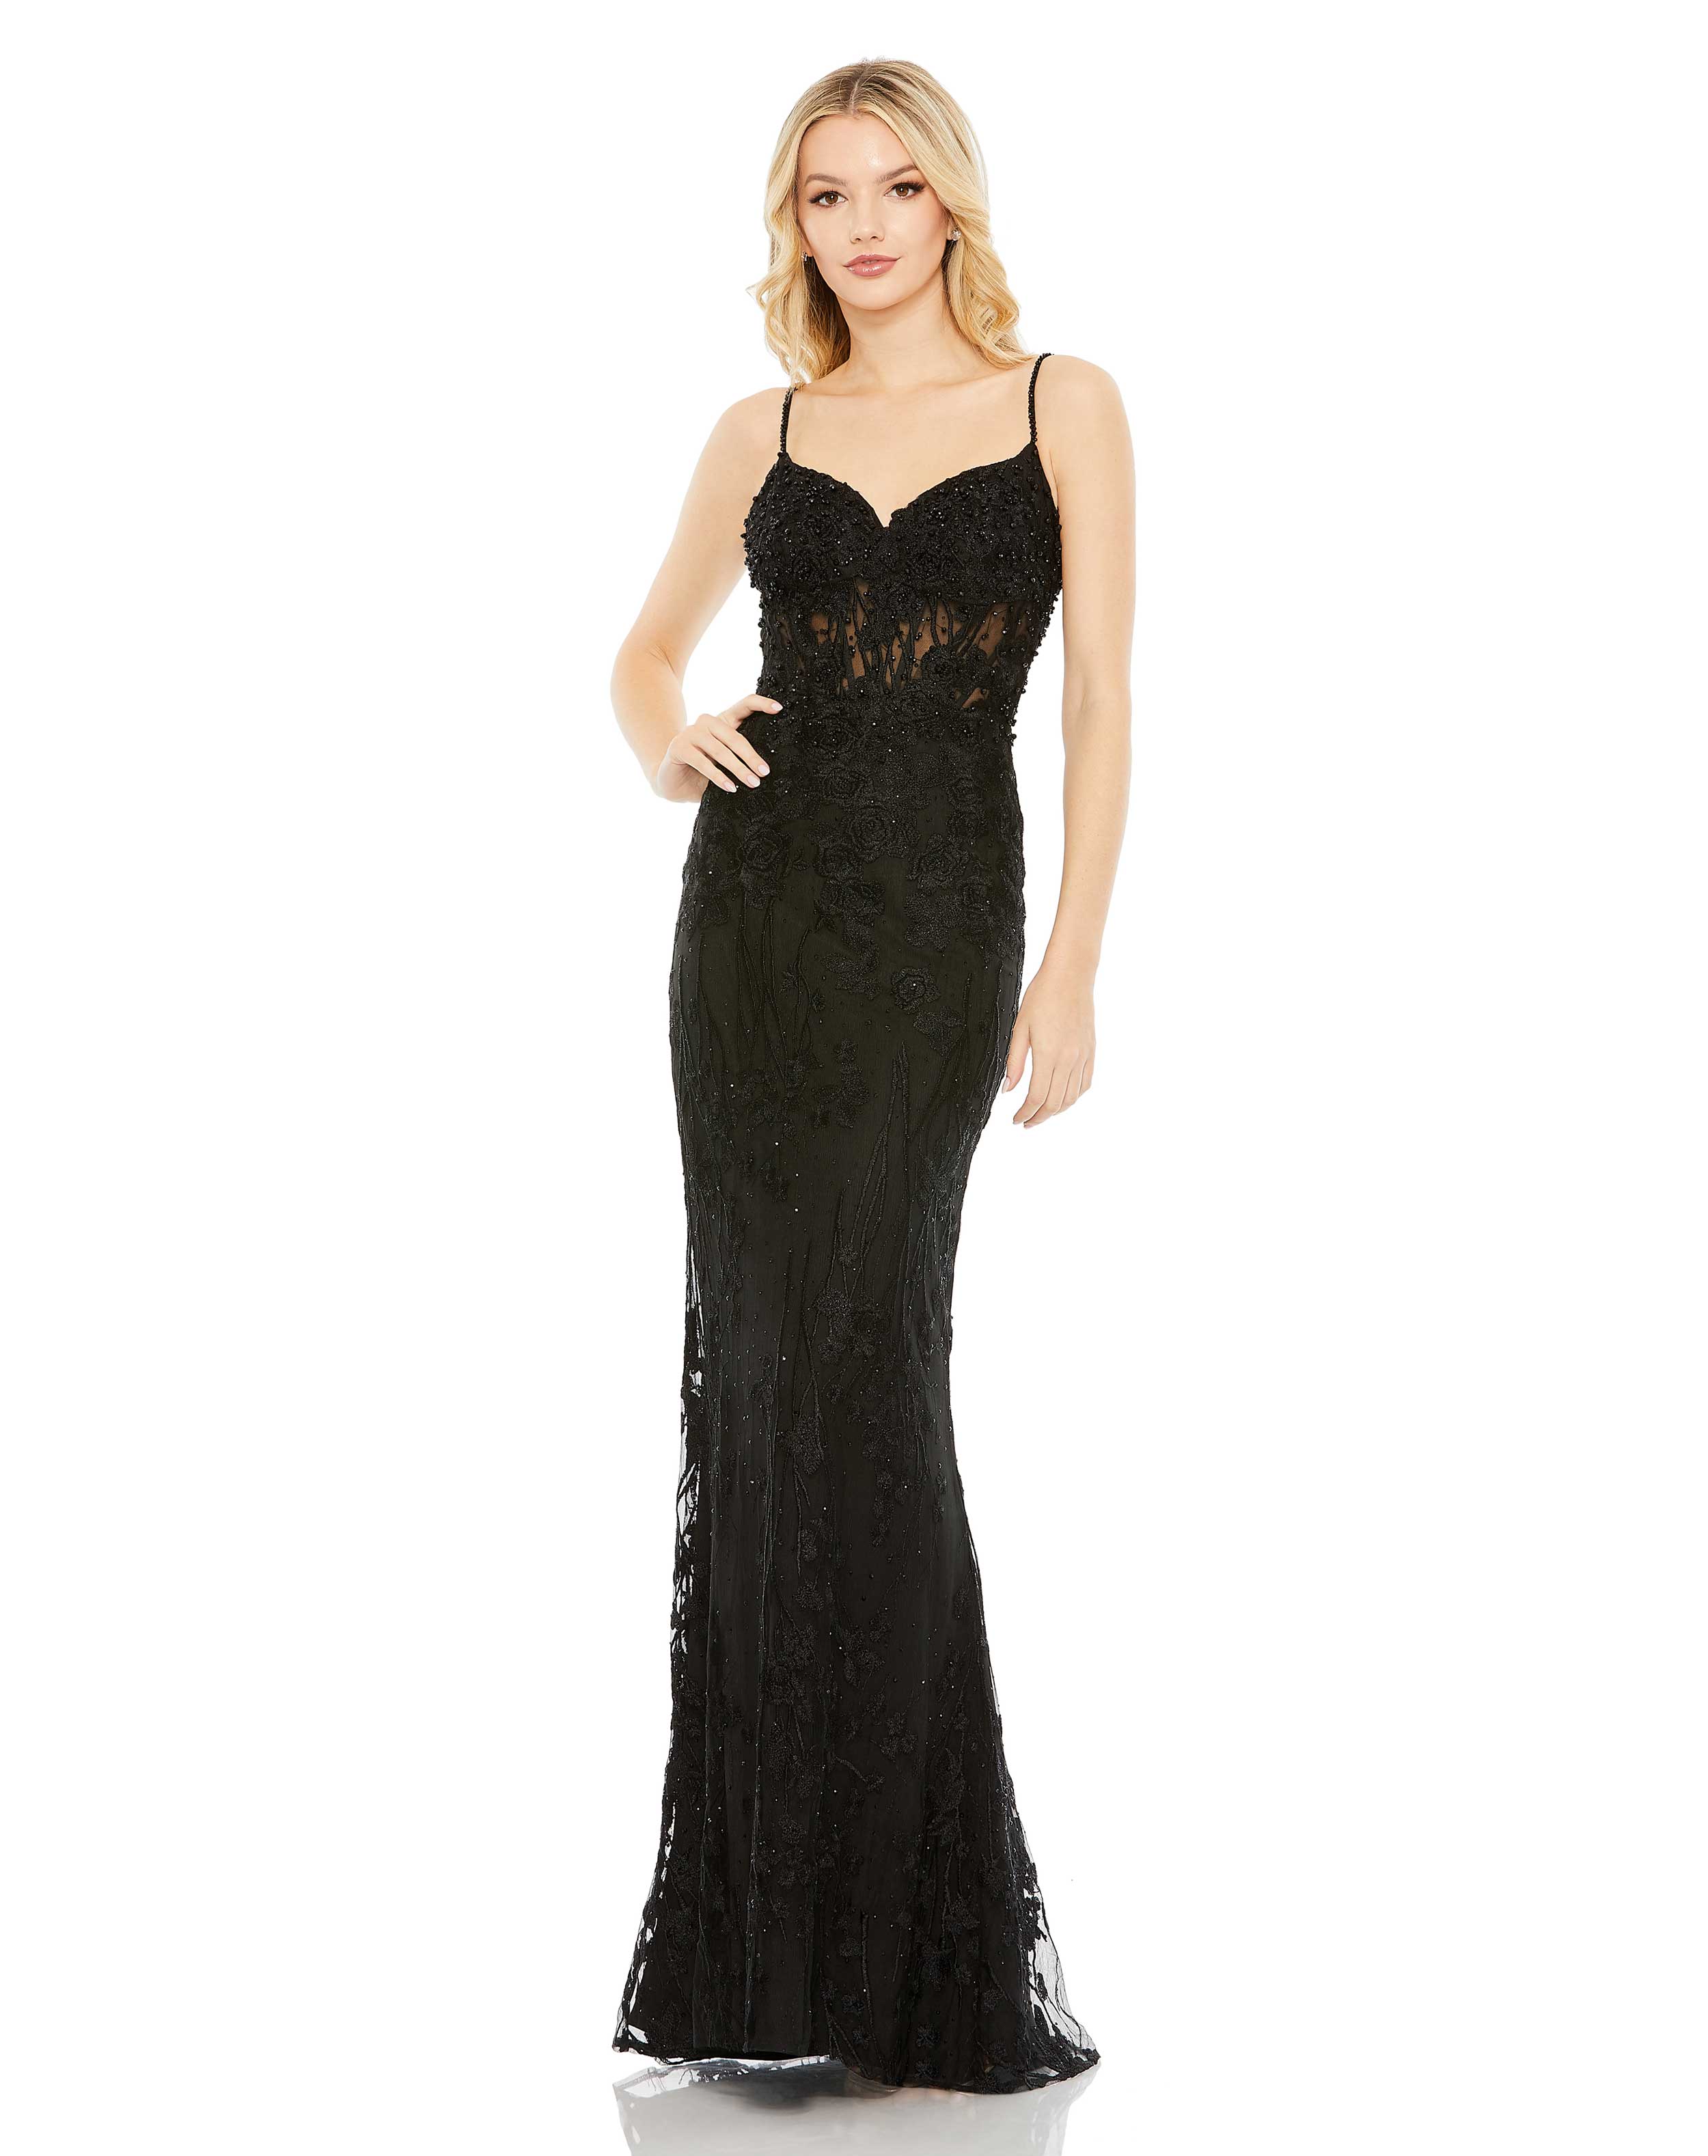 Embellished Sleeveless Illusion Bodice Gown - FINAL SALE